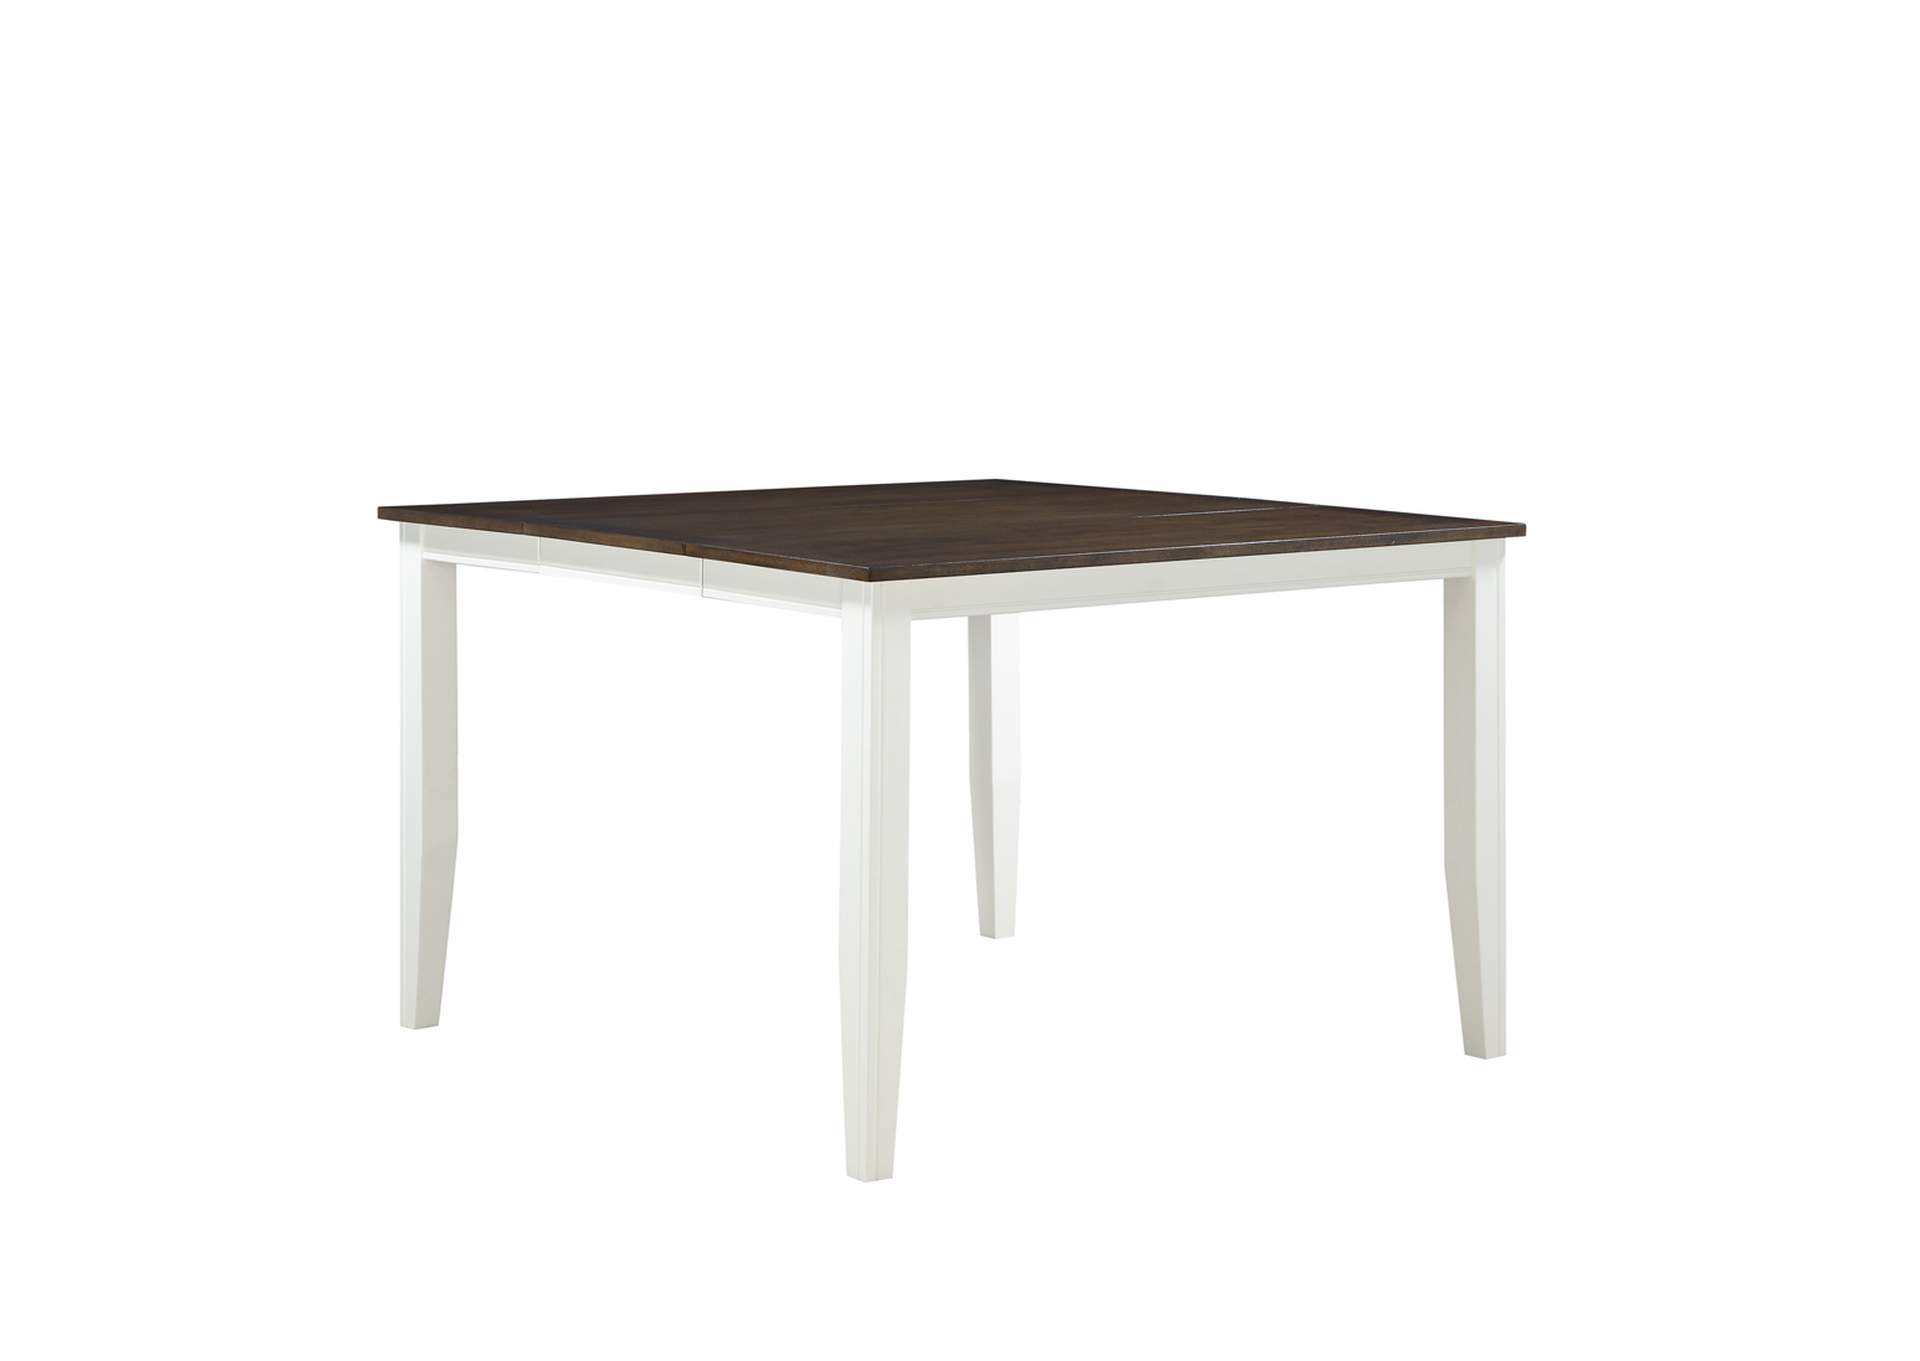 Sprague Gathering Height Table,Emerald Home Furnishings